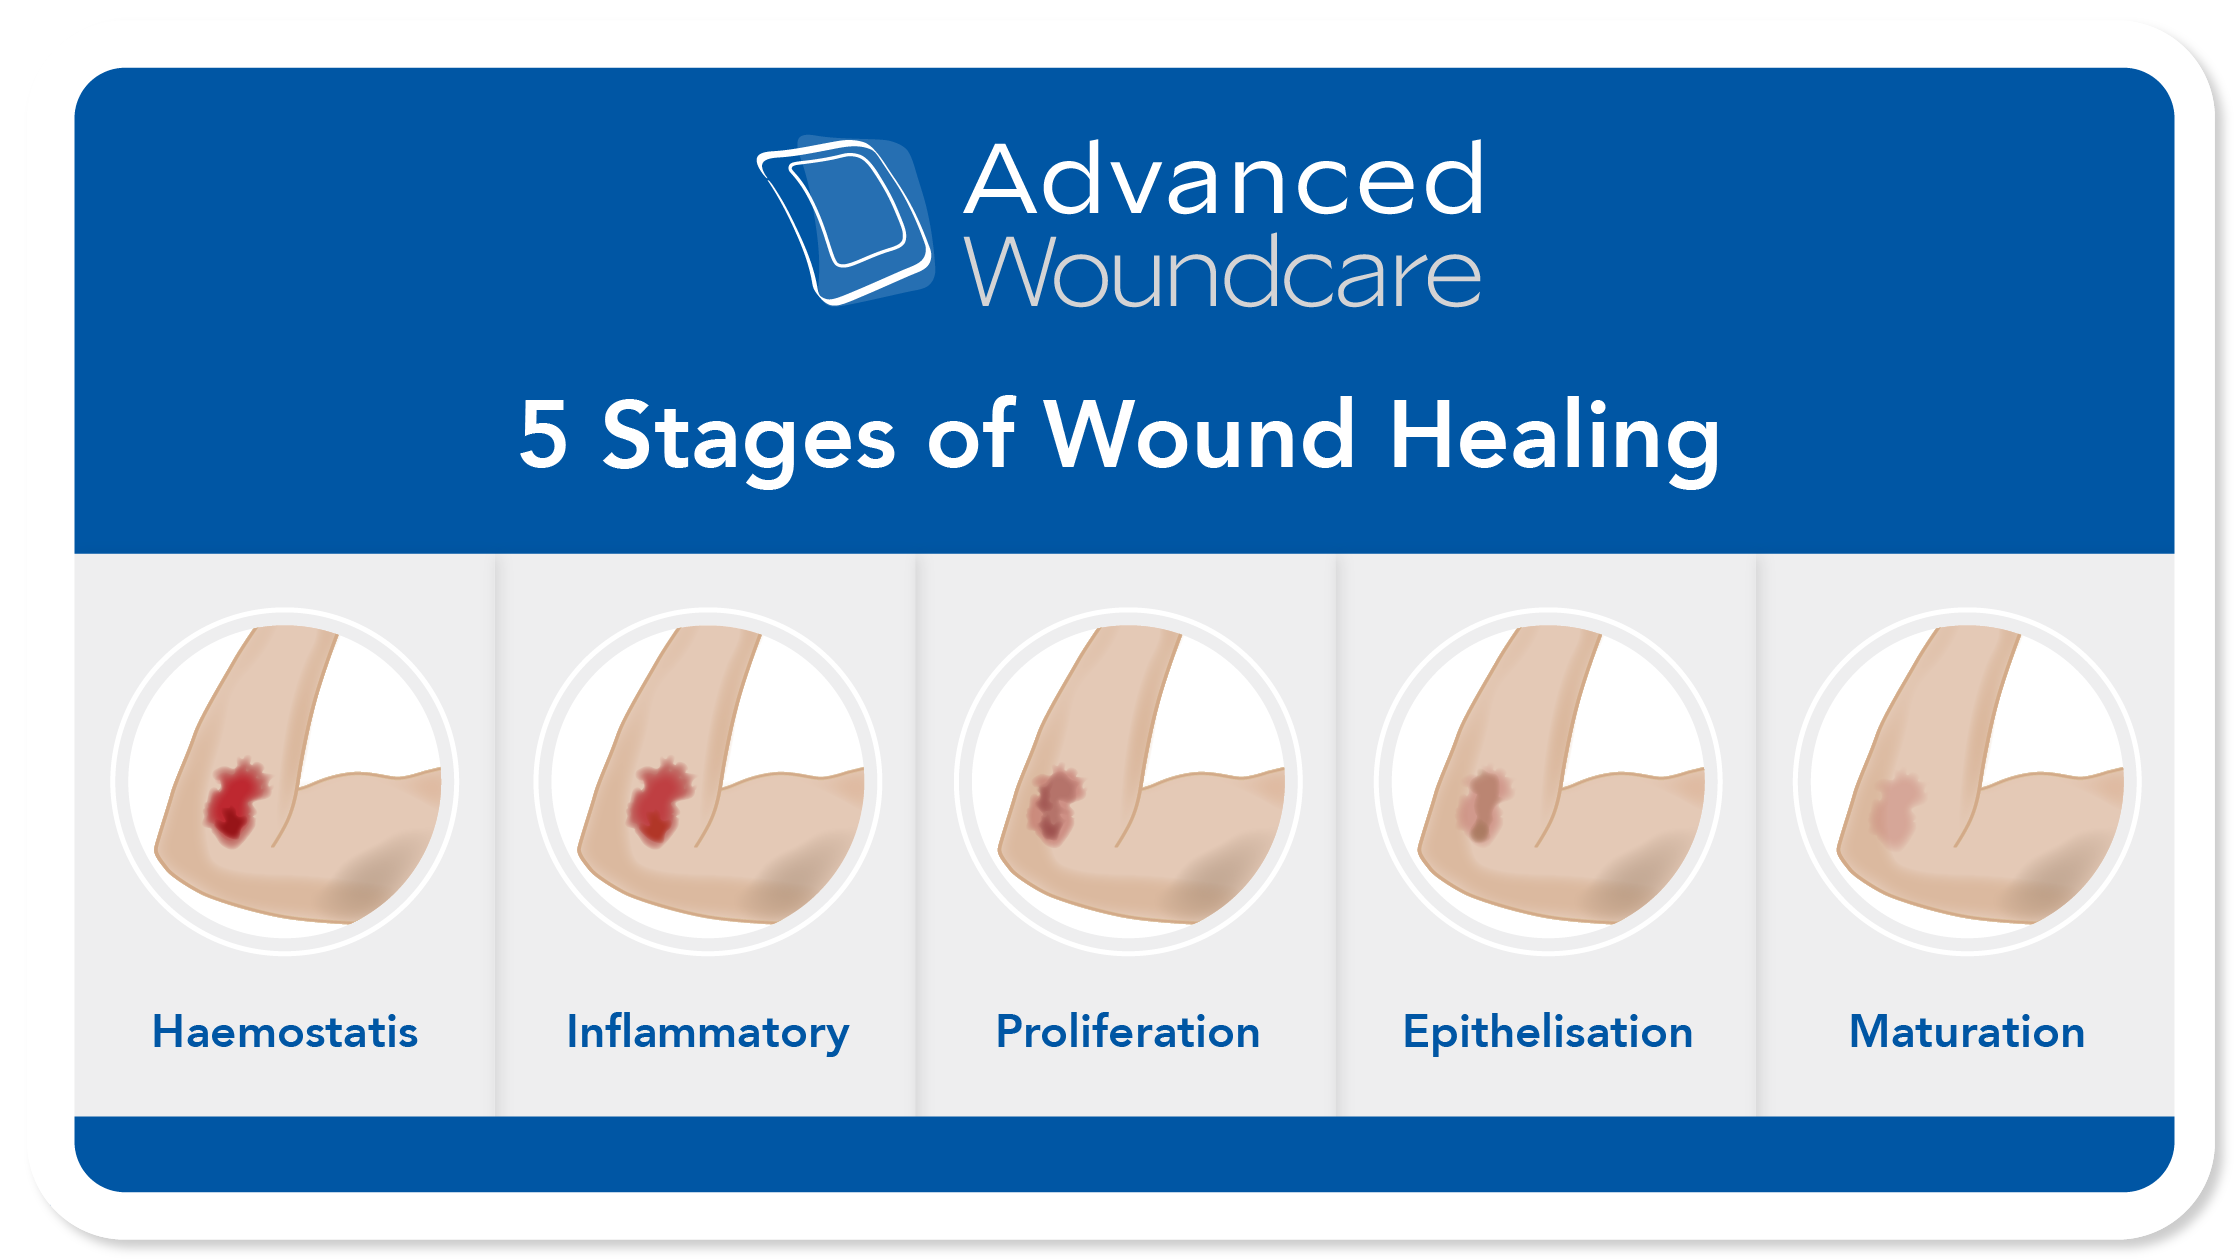 5 Stages of Wound Healing